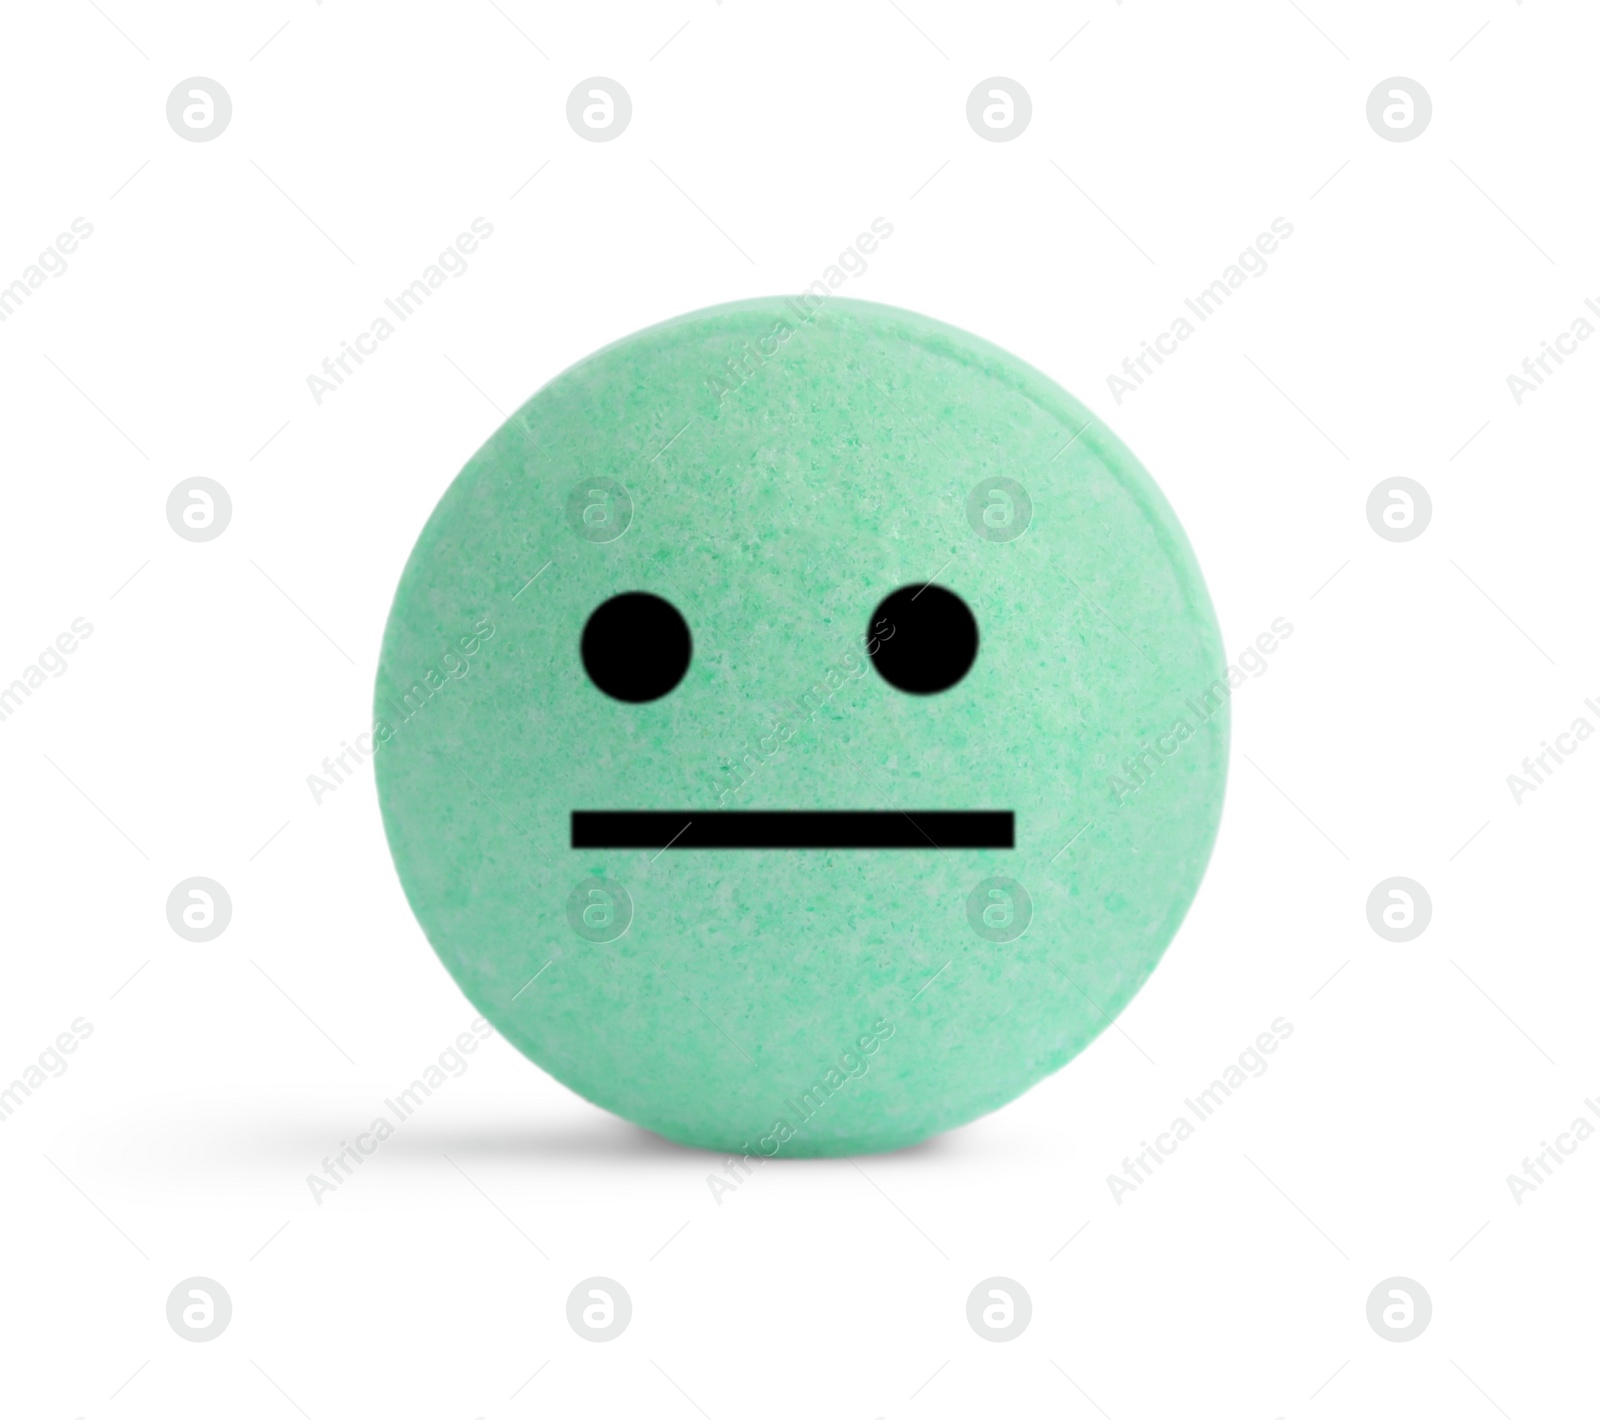 Image of Green pill with neutral face on white background